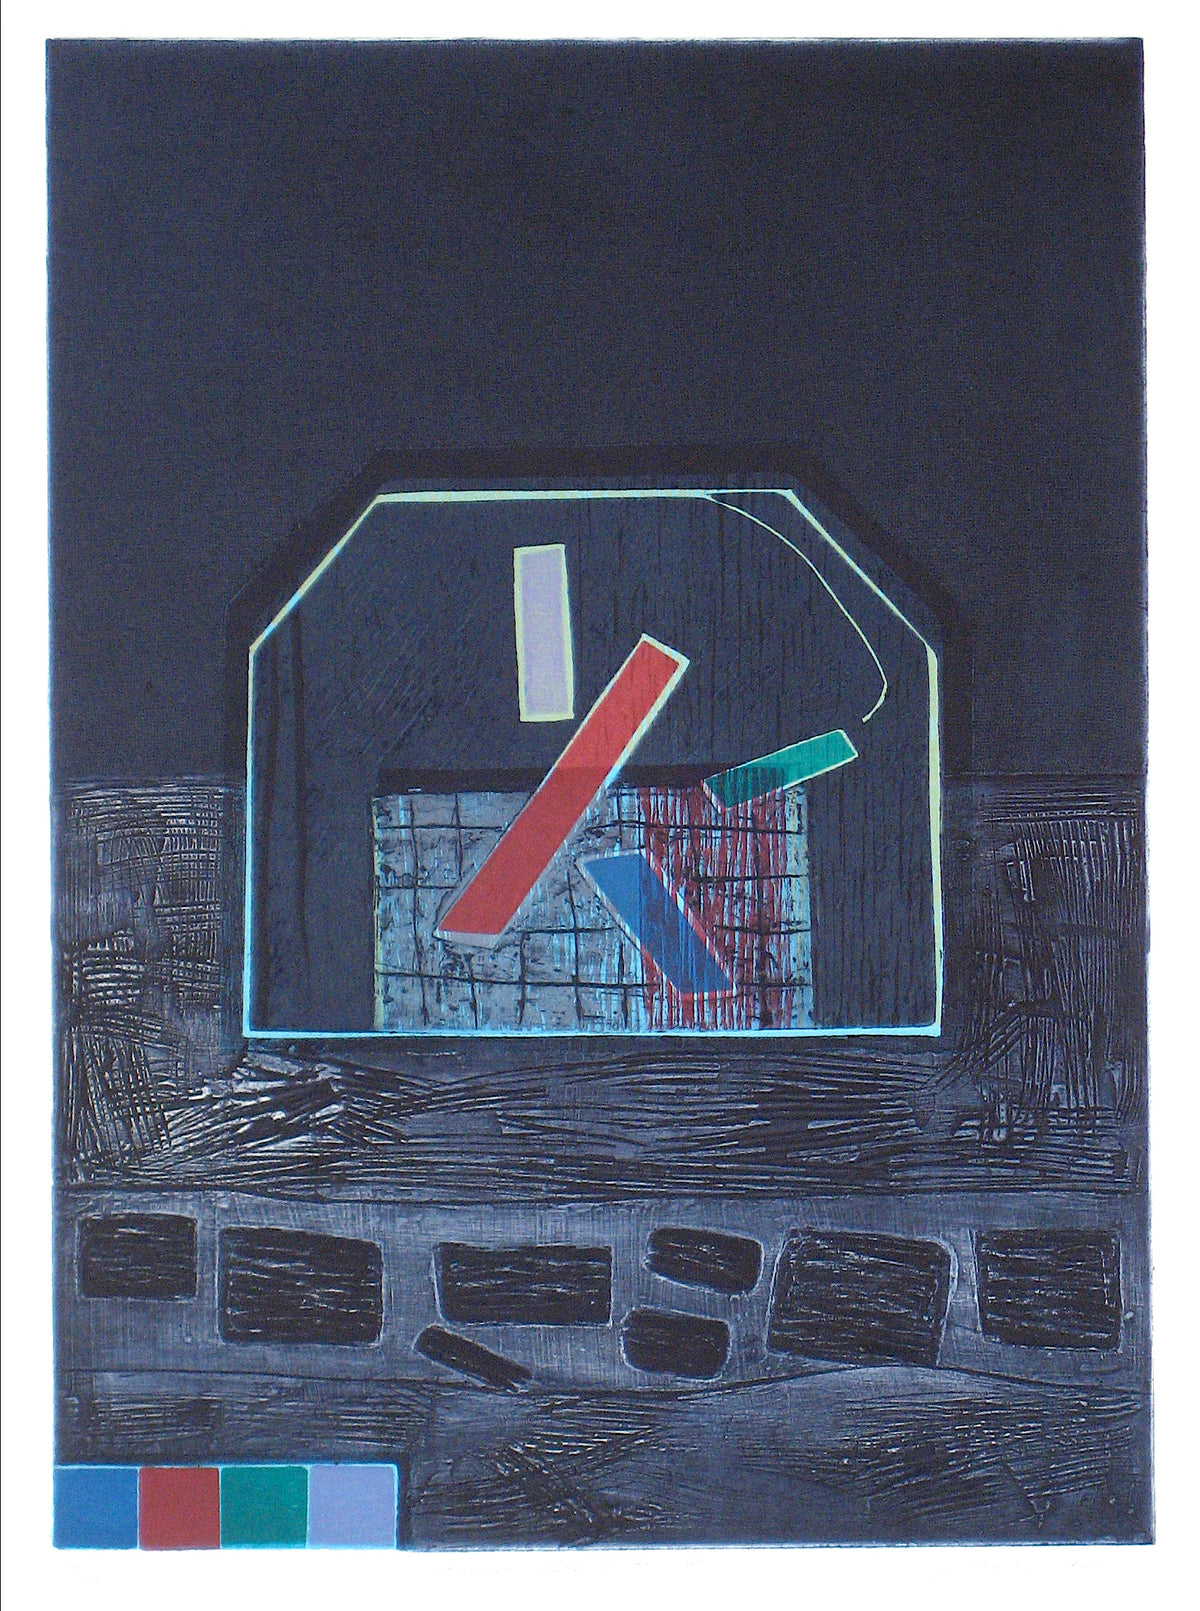 &lt;i&gt;House Grid #64&lt;/i&gt; &lt;br&gt;1970s-1980s Collograph Abstract &lt;br&gt;&lt;br&gt;#12010